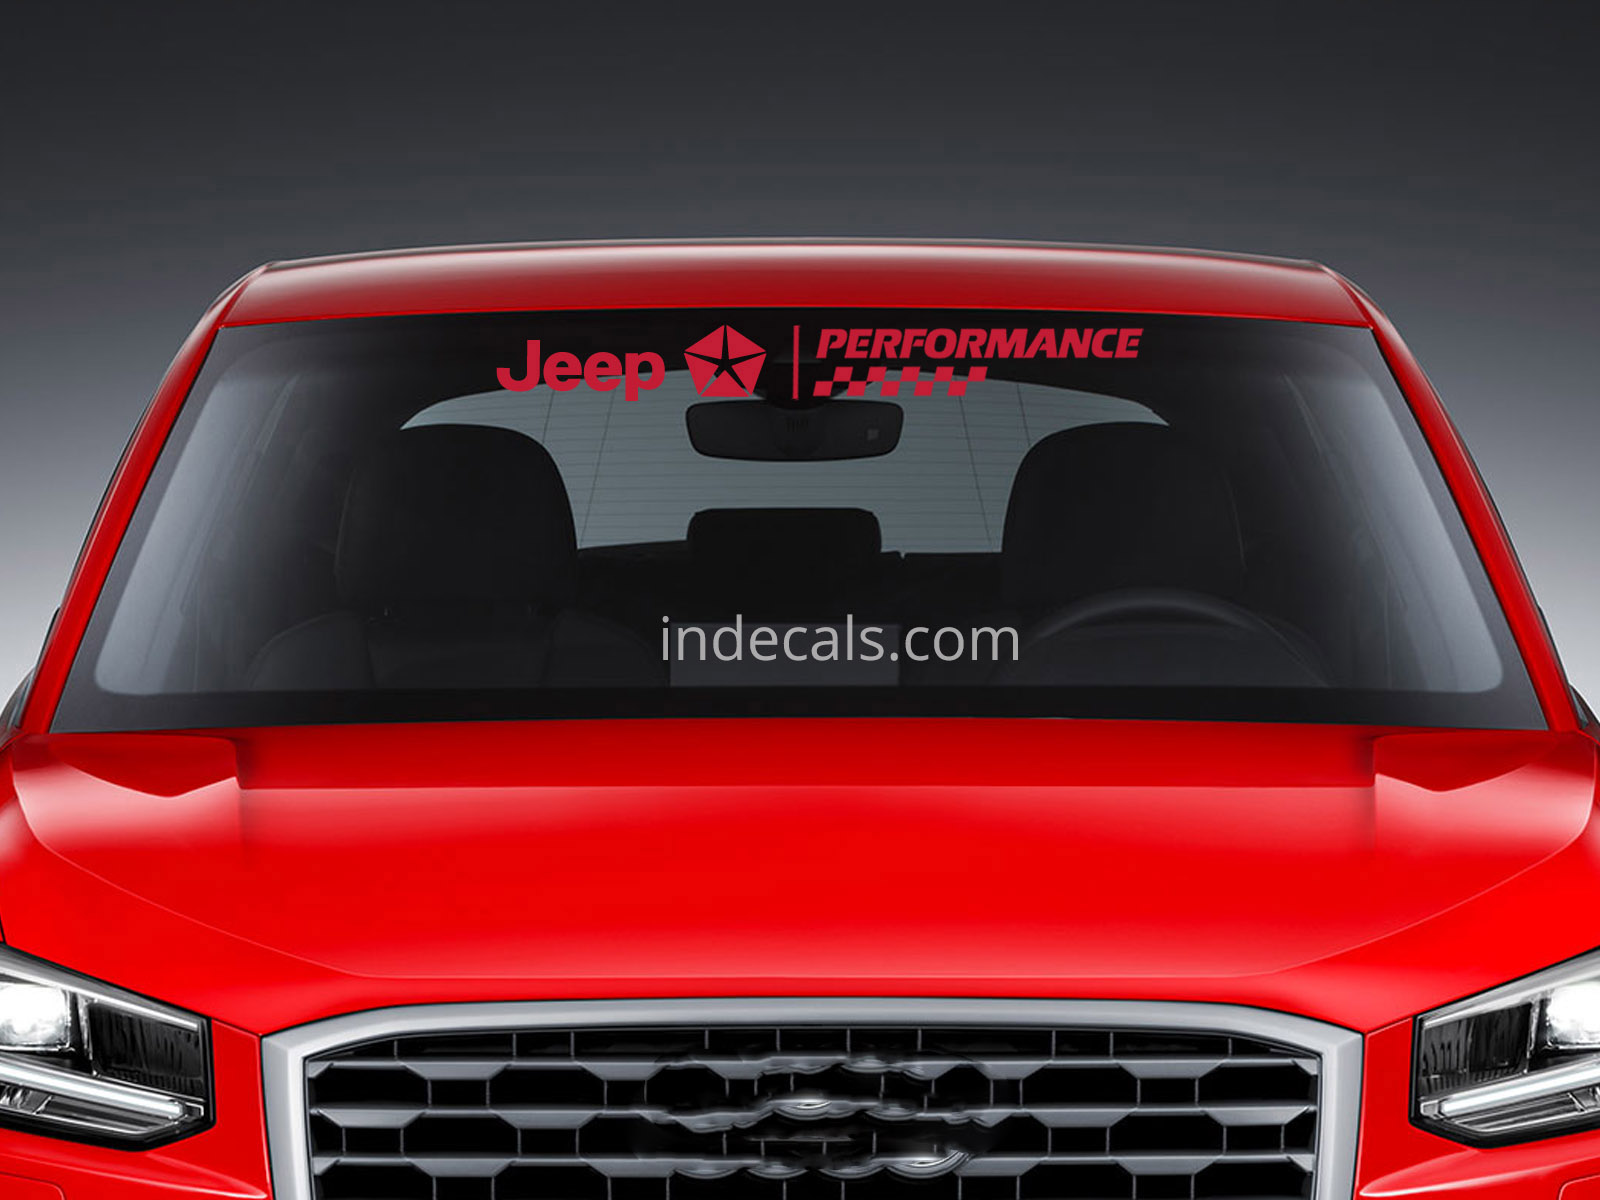 1 x Jeep Performance Sticker for Windshield or Back Window - Red